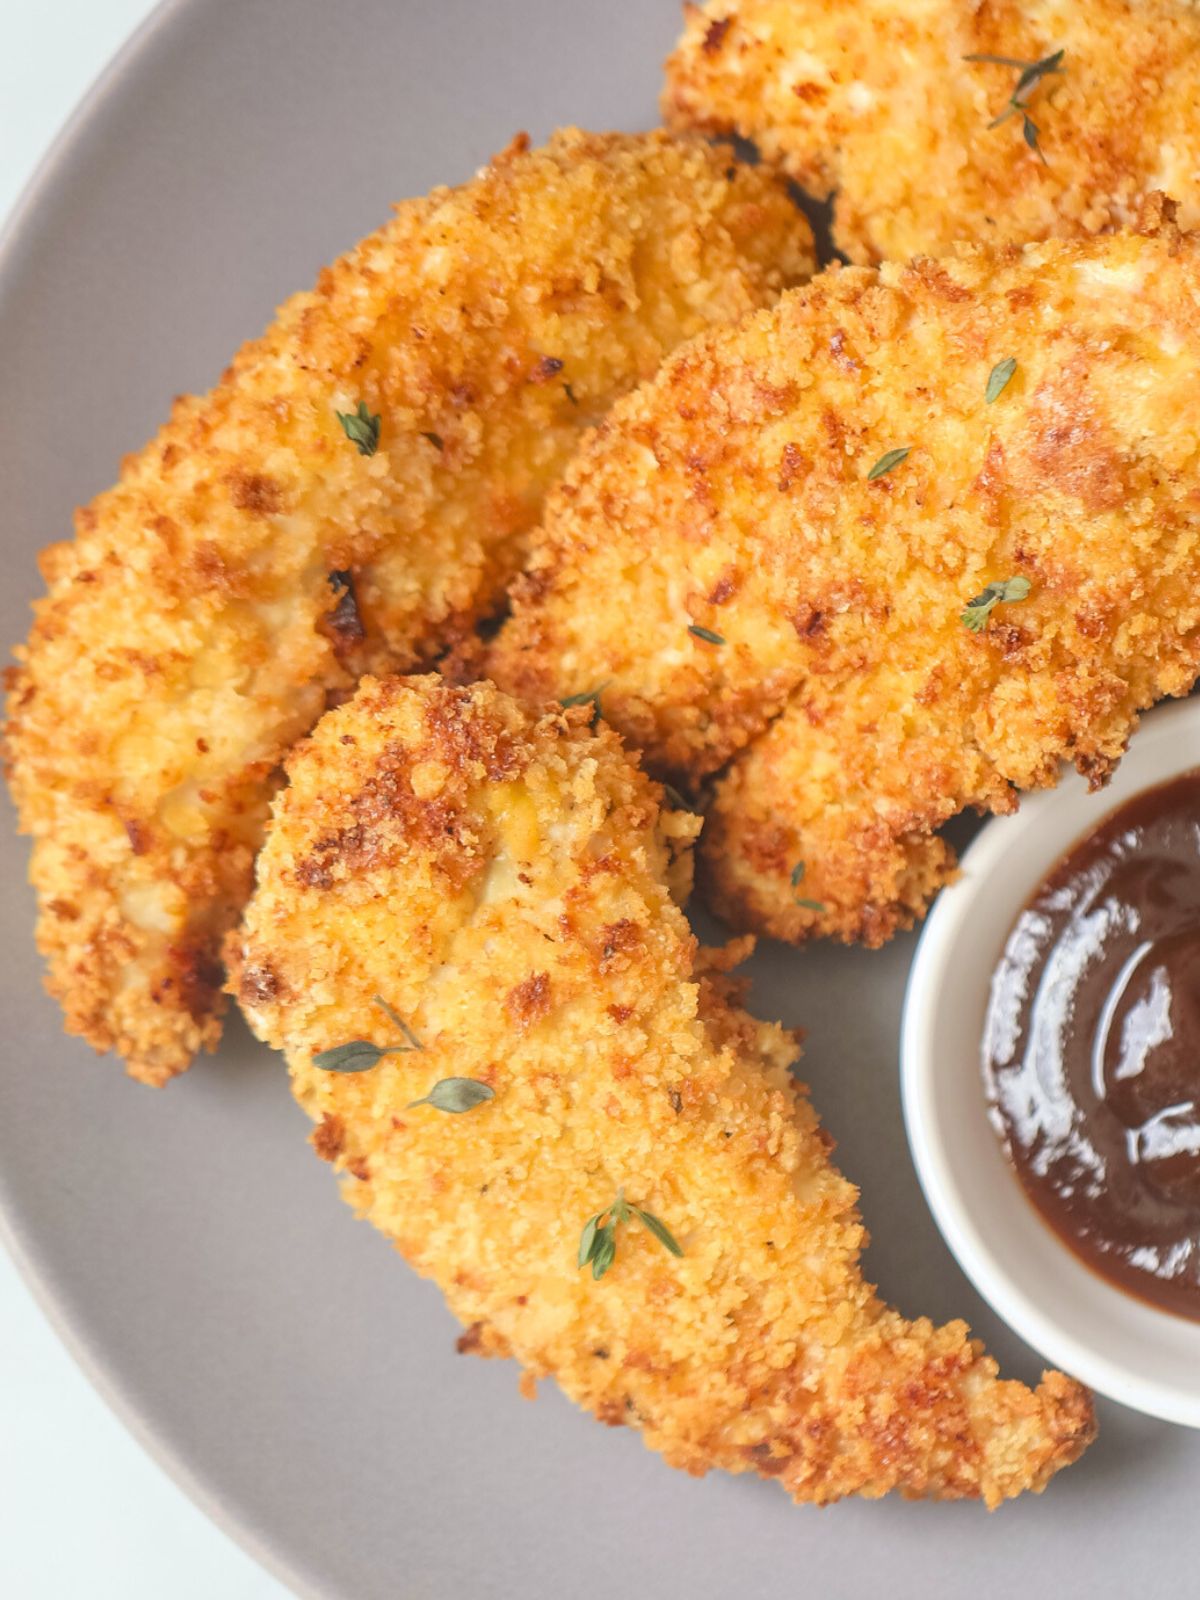 Crispy Air Fryer Chicken Tenders on a gray plate next to BBQ sauce.